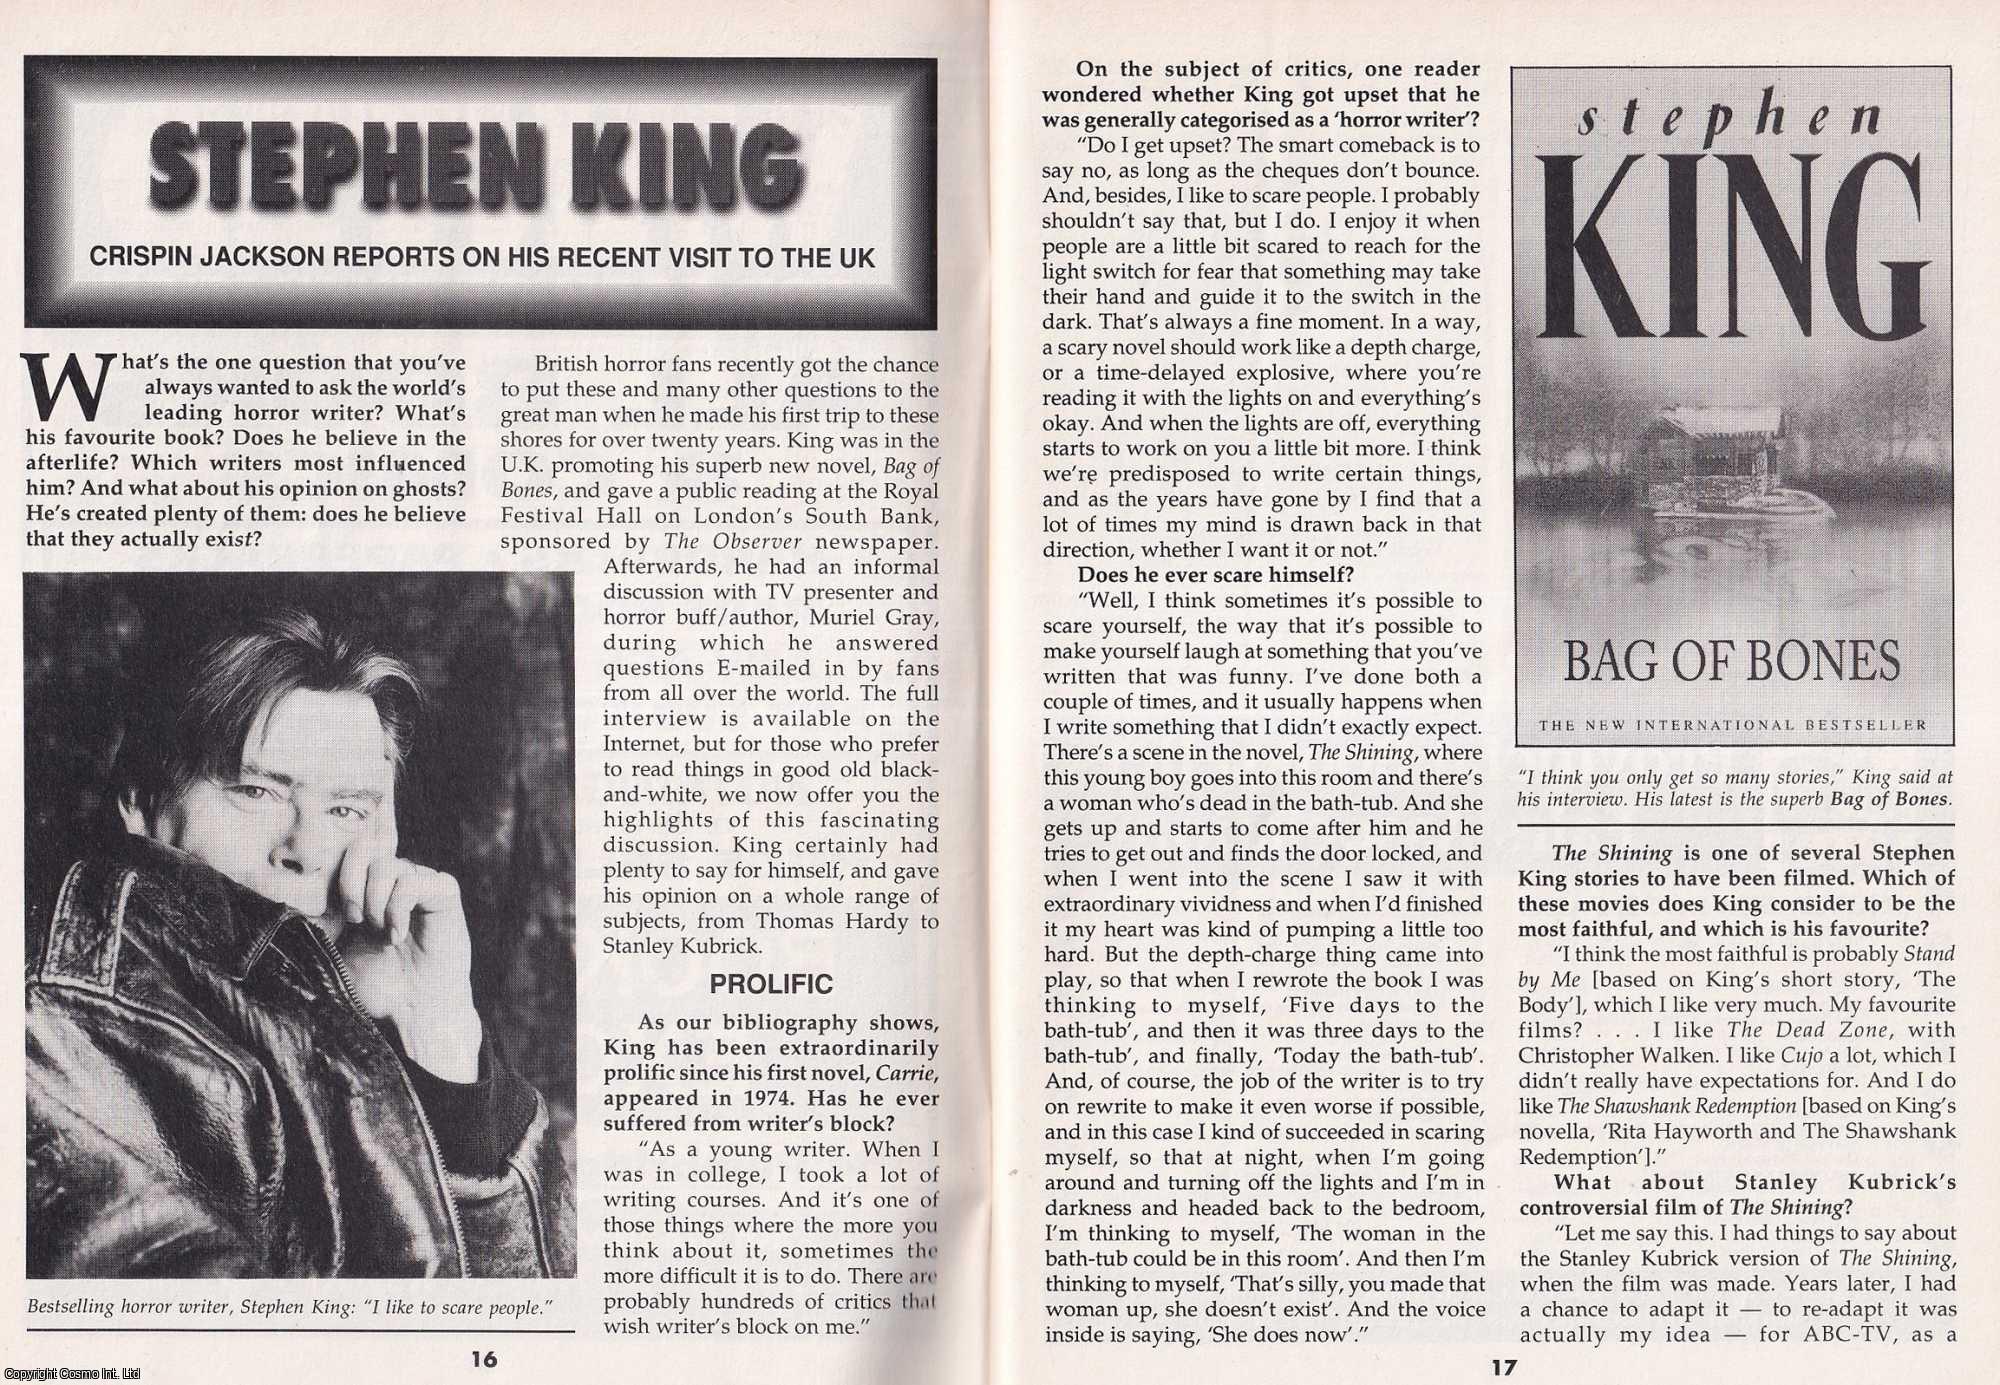 Crispin Jackson - Stephen King. Reporting on his Recent Visit to The UK. This is an original article separated from an issue of The Book & Magazine Collector publication.